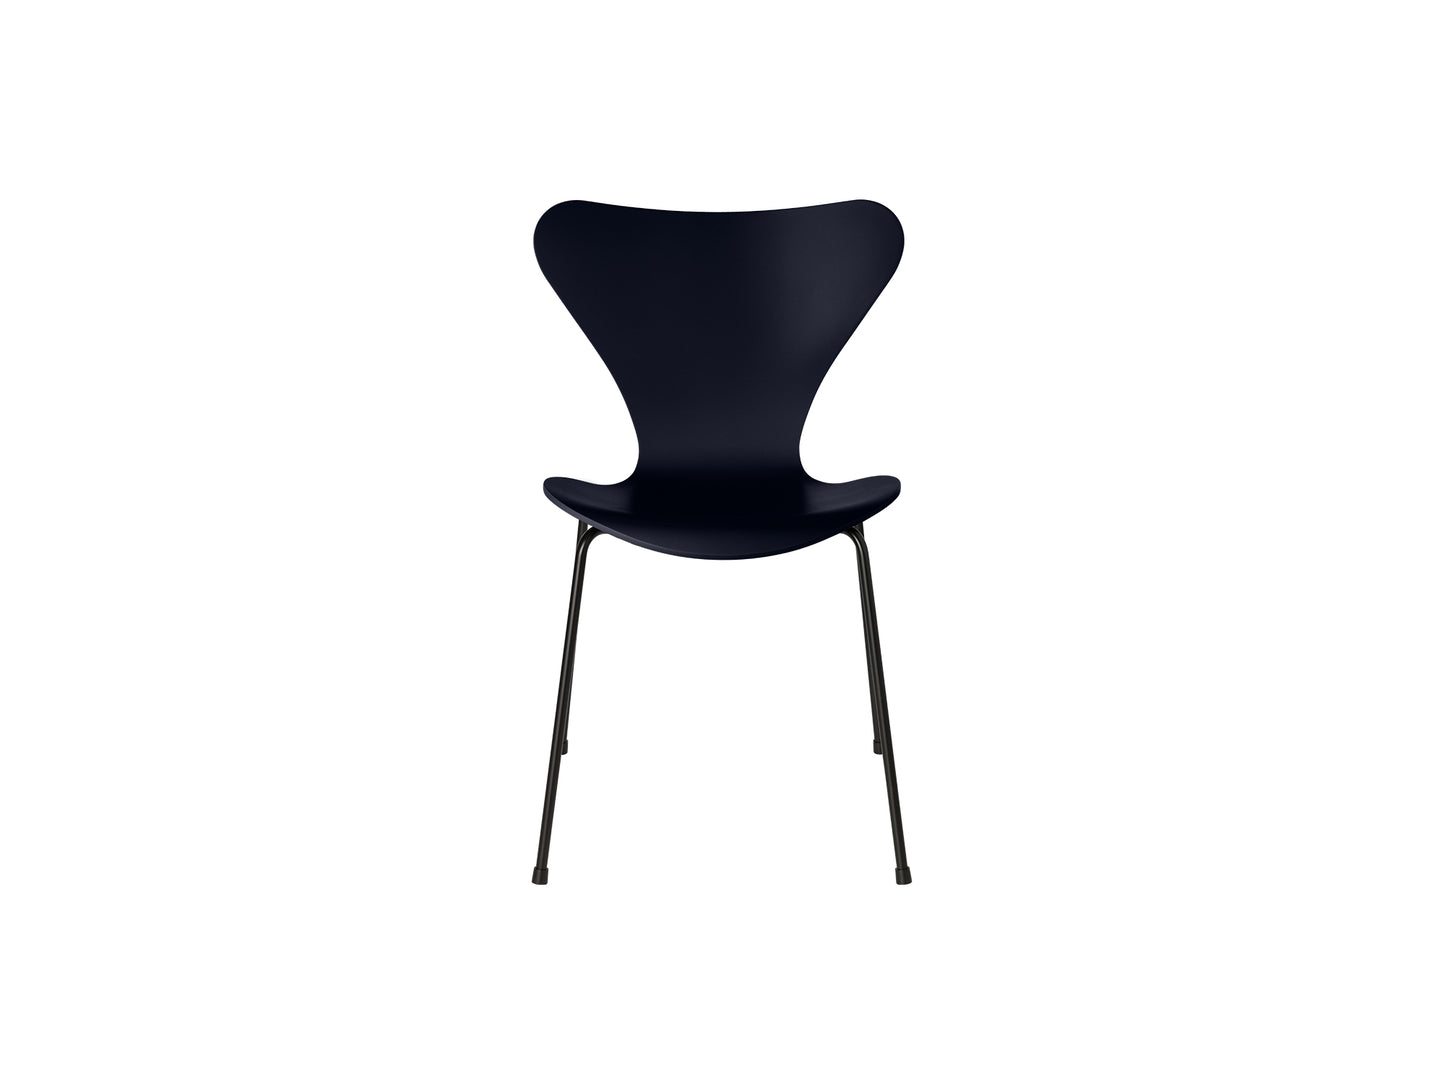 Series 7™ 3107 Dining Chair by Fritz Hansen - Midnight Blue Lacquered Veneer Shell / Black Steel